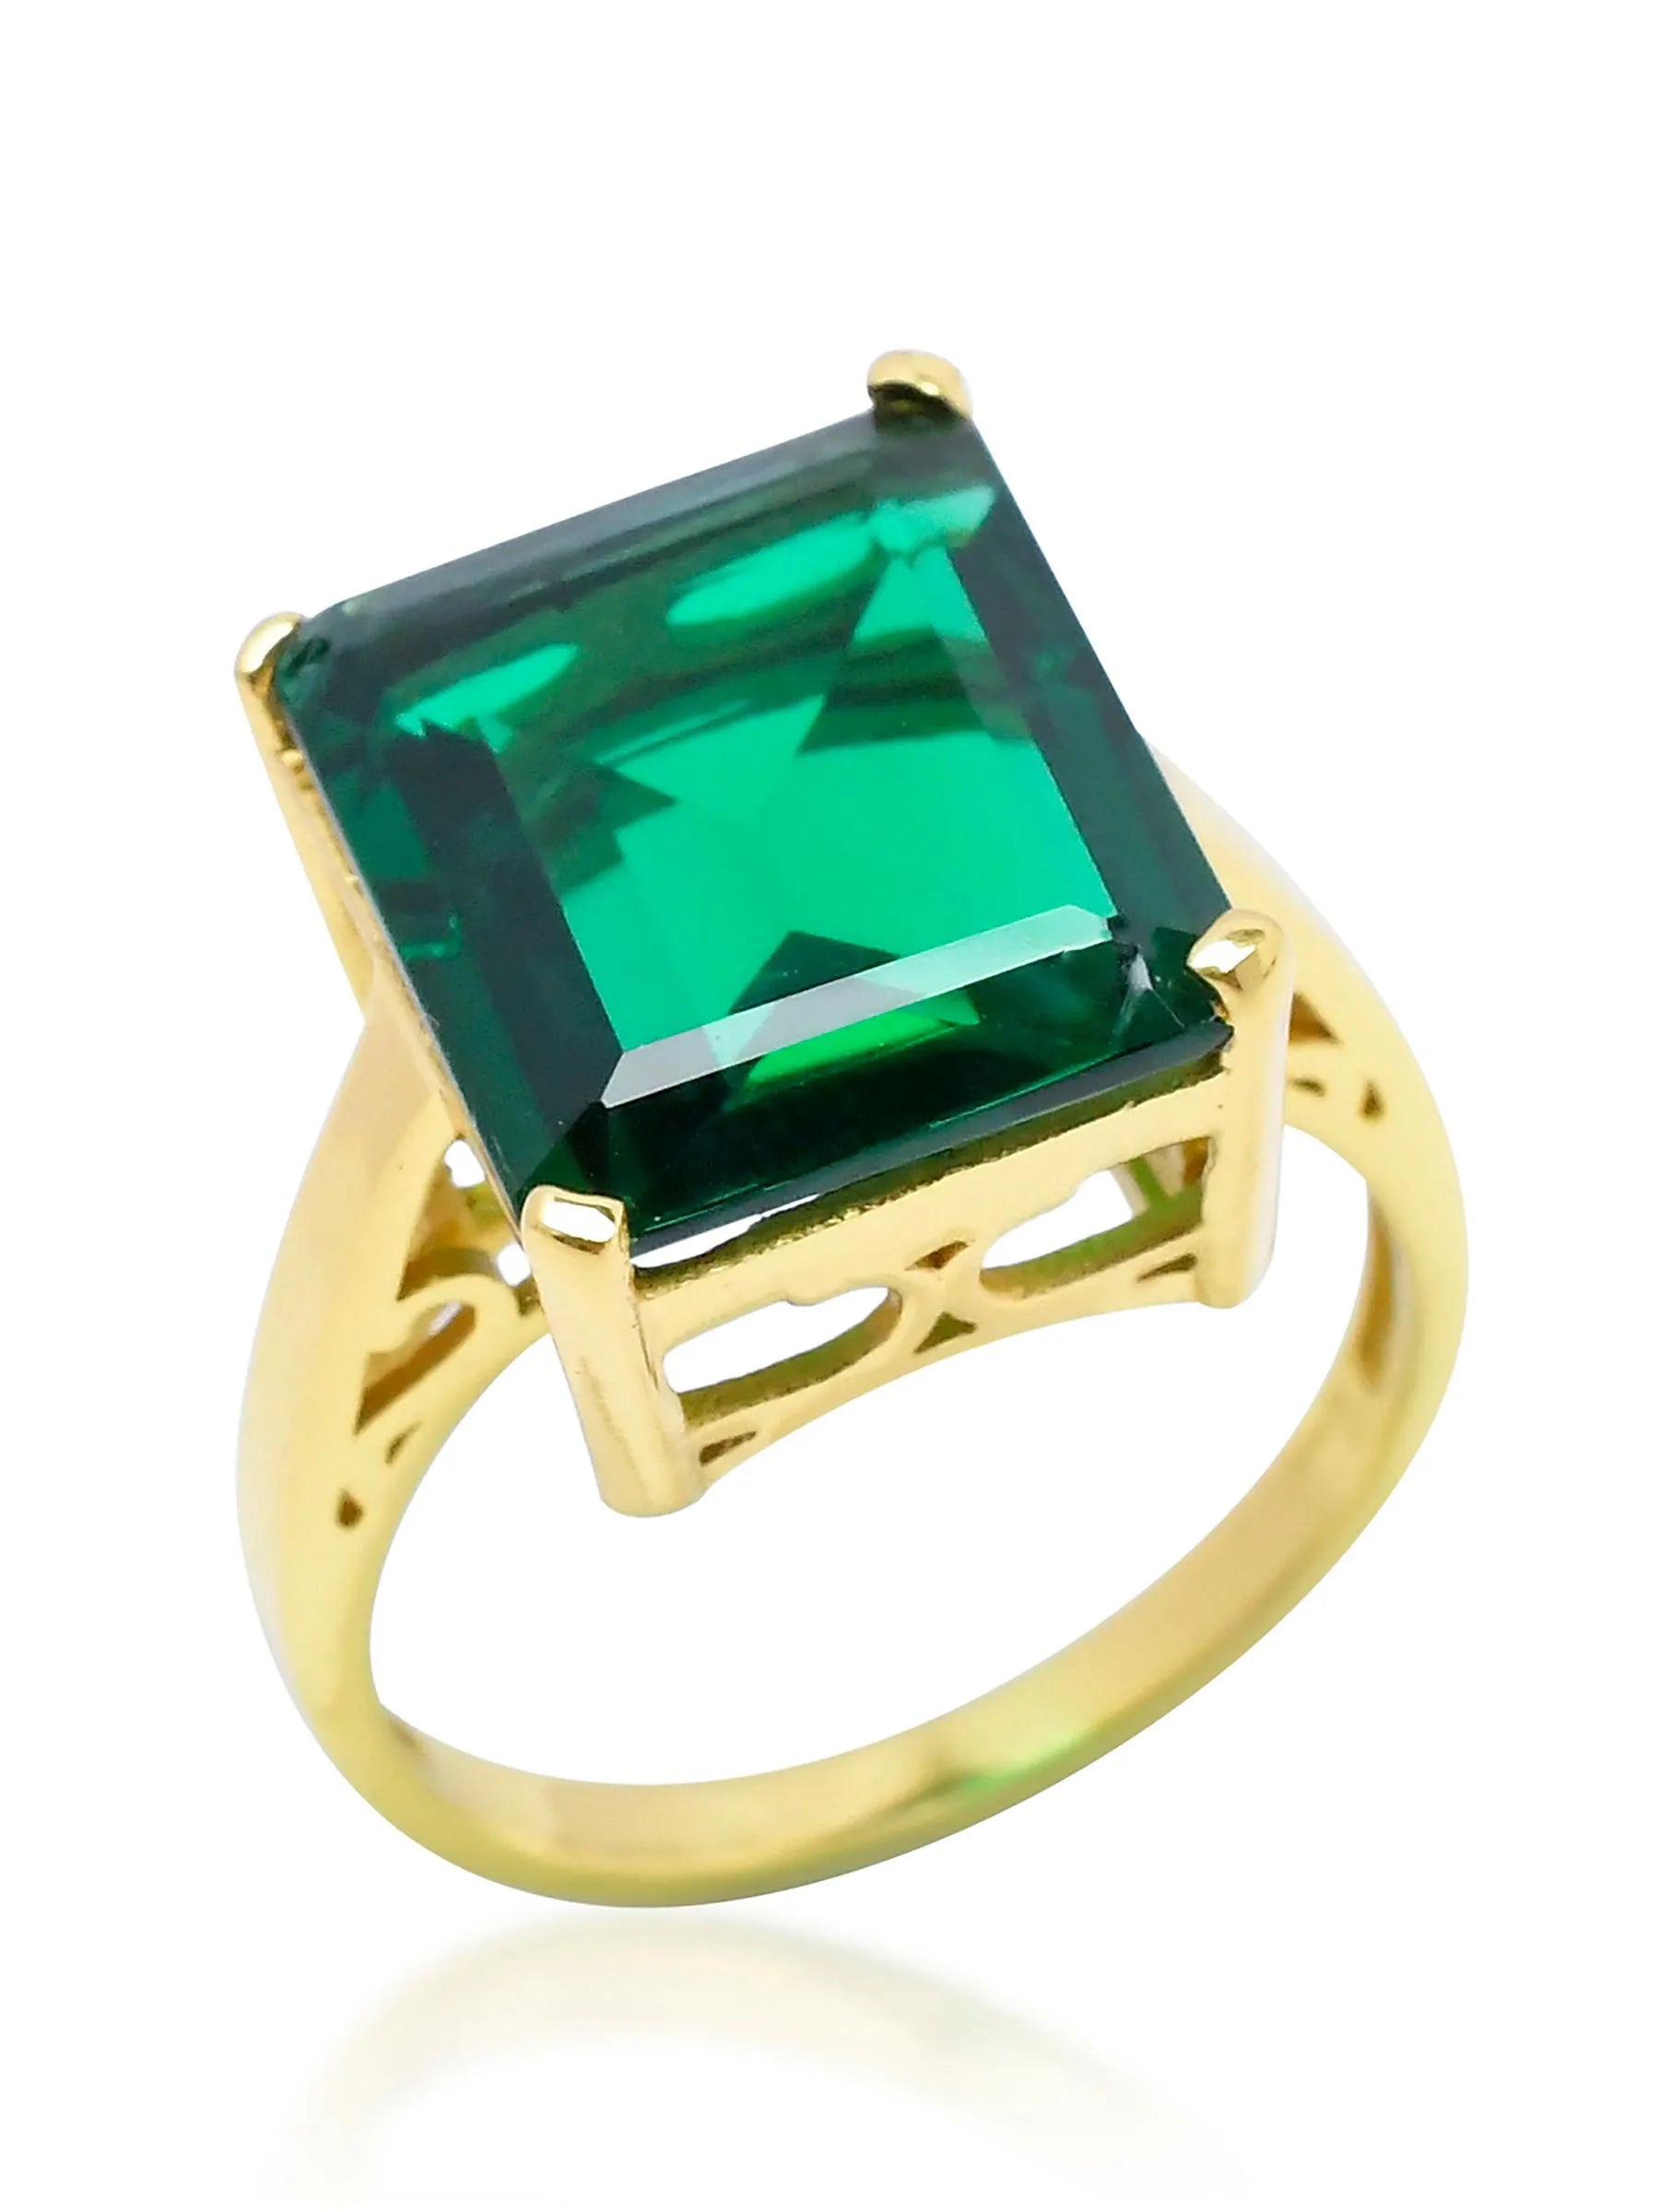 The SHYLA - Claudia Ring - Gold showcases a stunning emerald cut stone set in lustrous yellow gold, exuding a vintage look.